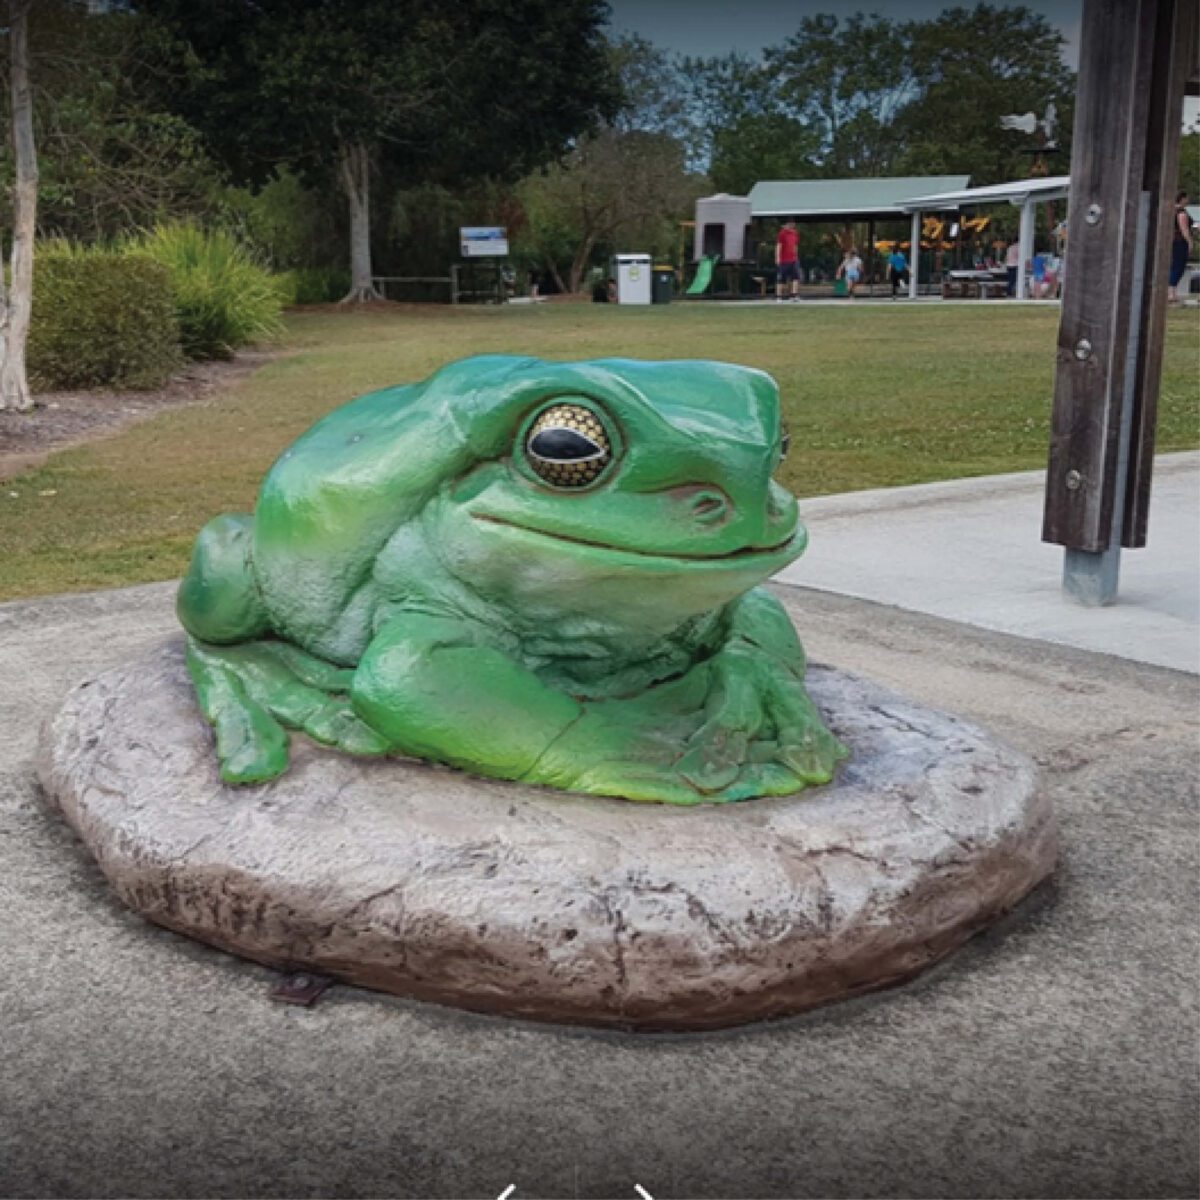 https://natureworks.com.au/wp-content/uploads/2020/08/Green_Tree_Frog_On_Rock_Giant-090012ROCK-shown-installed-in-playground-.jpg